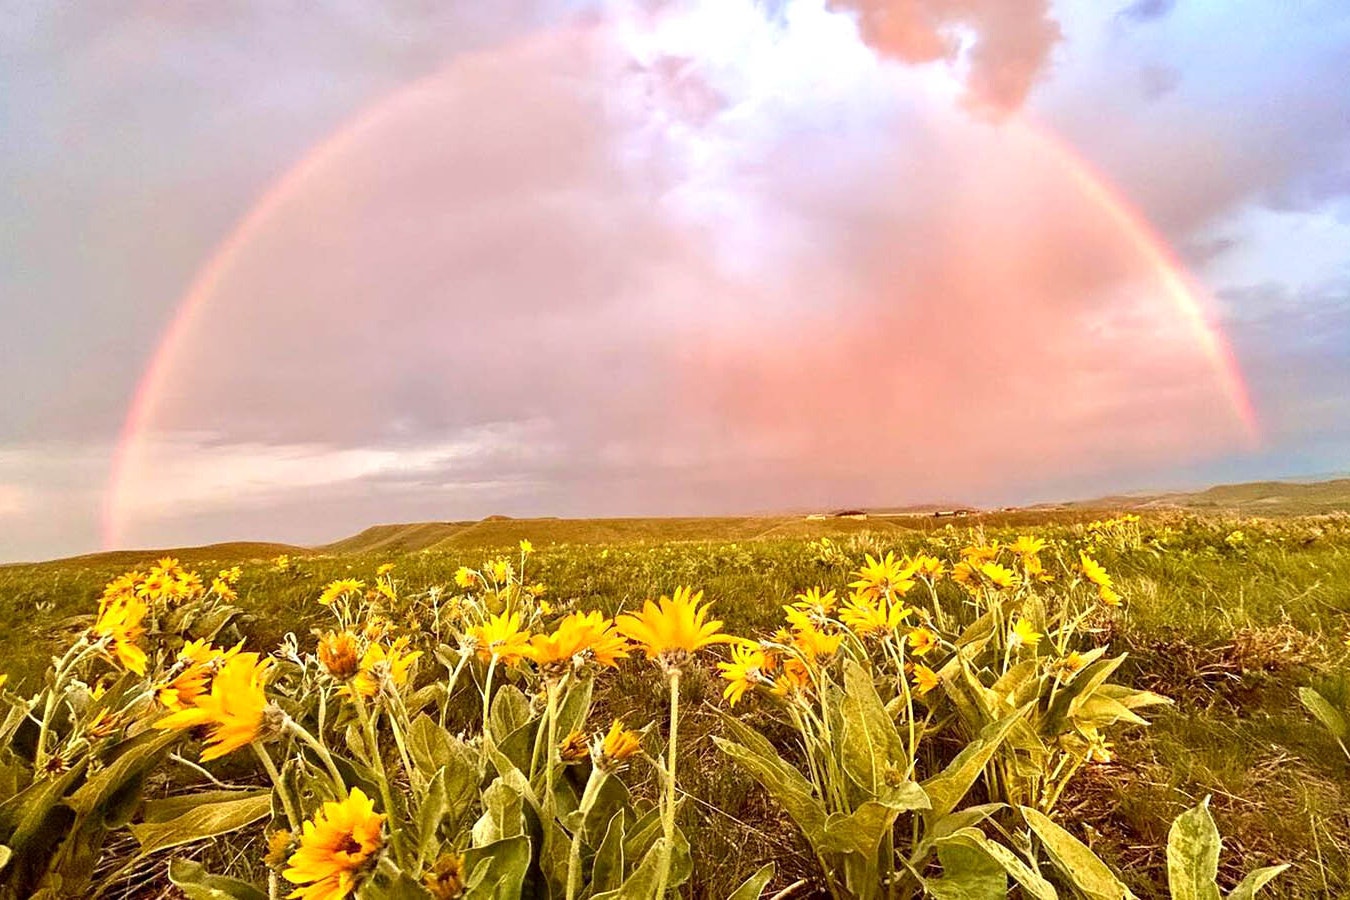 This splendid rainbow over a colorful field of wildflower in the Bighorns inspired Victoria Haun of the Lucky Chukar Ranch in the Bighorn Mountains.